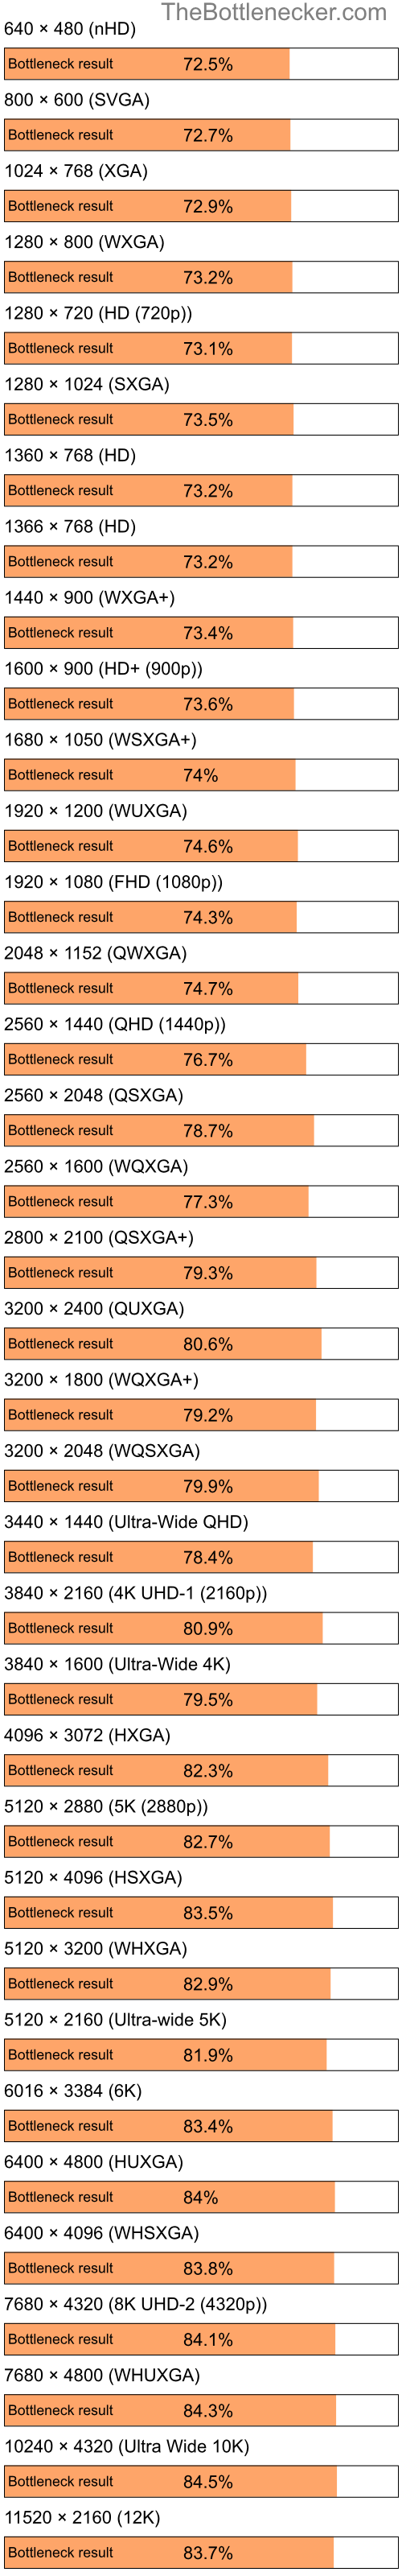 Bottleneck results by resolution for Intel Atom N280 and AMD Radeon 2100 in7 Days to Die